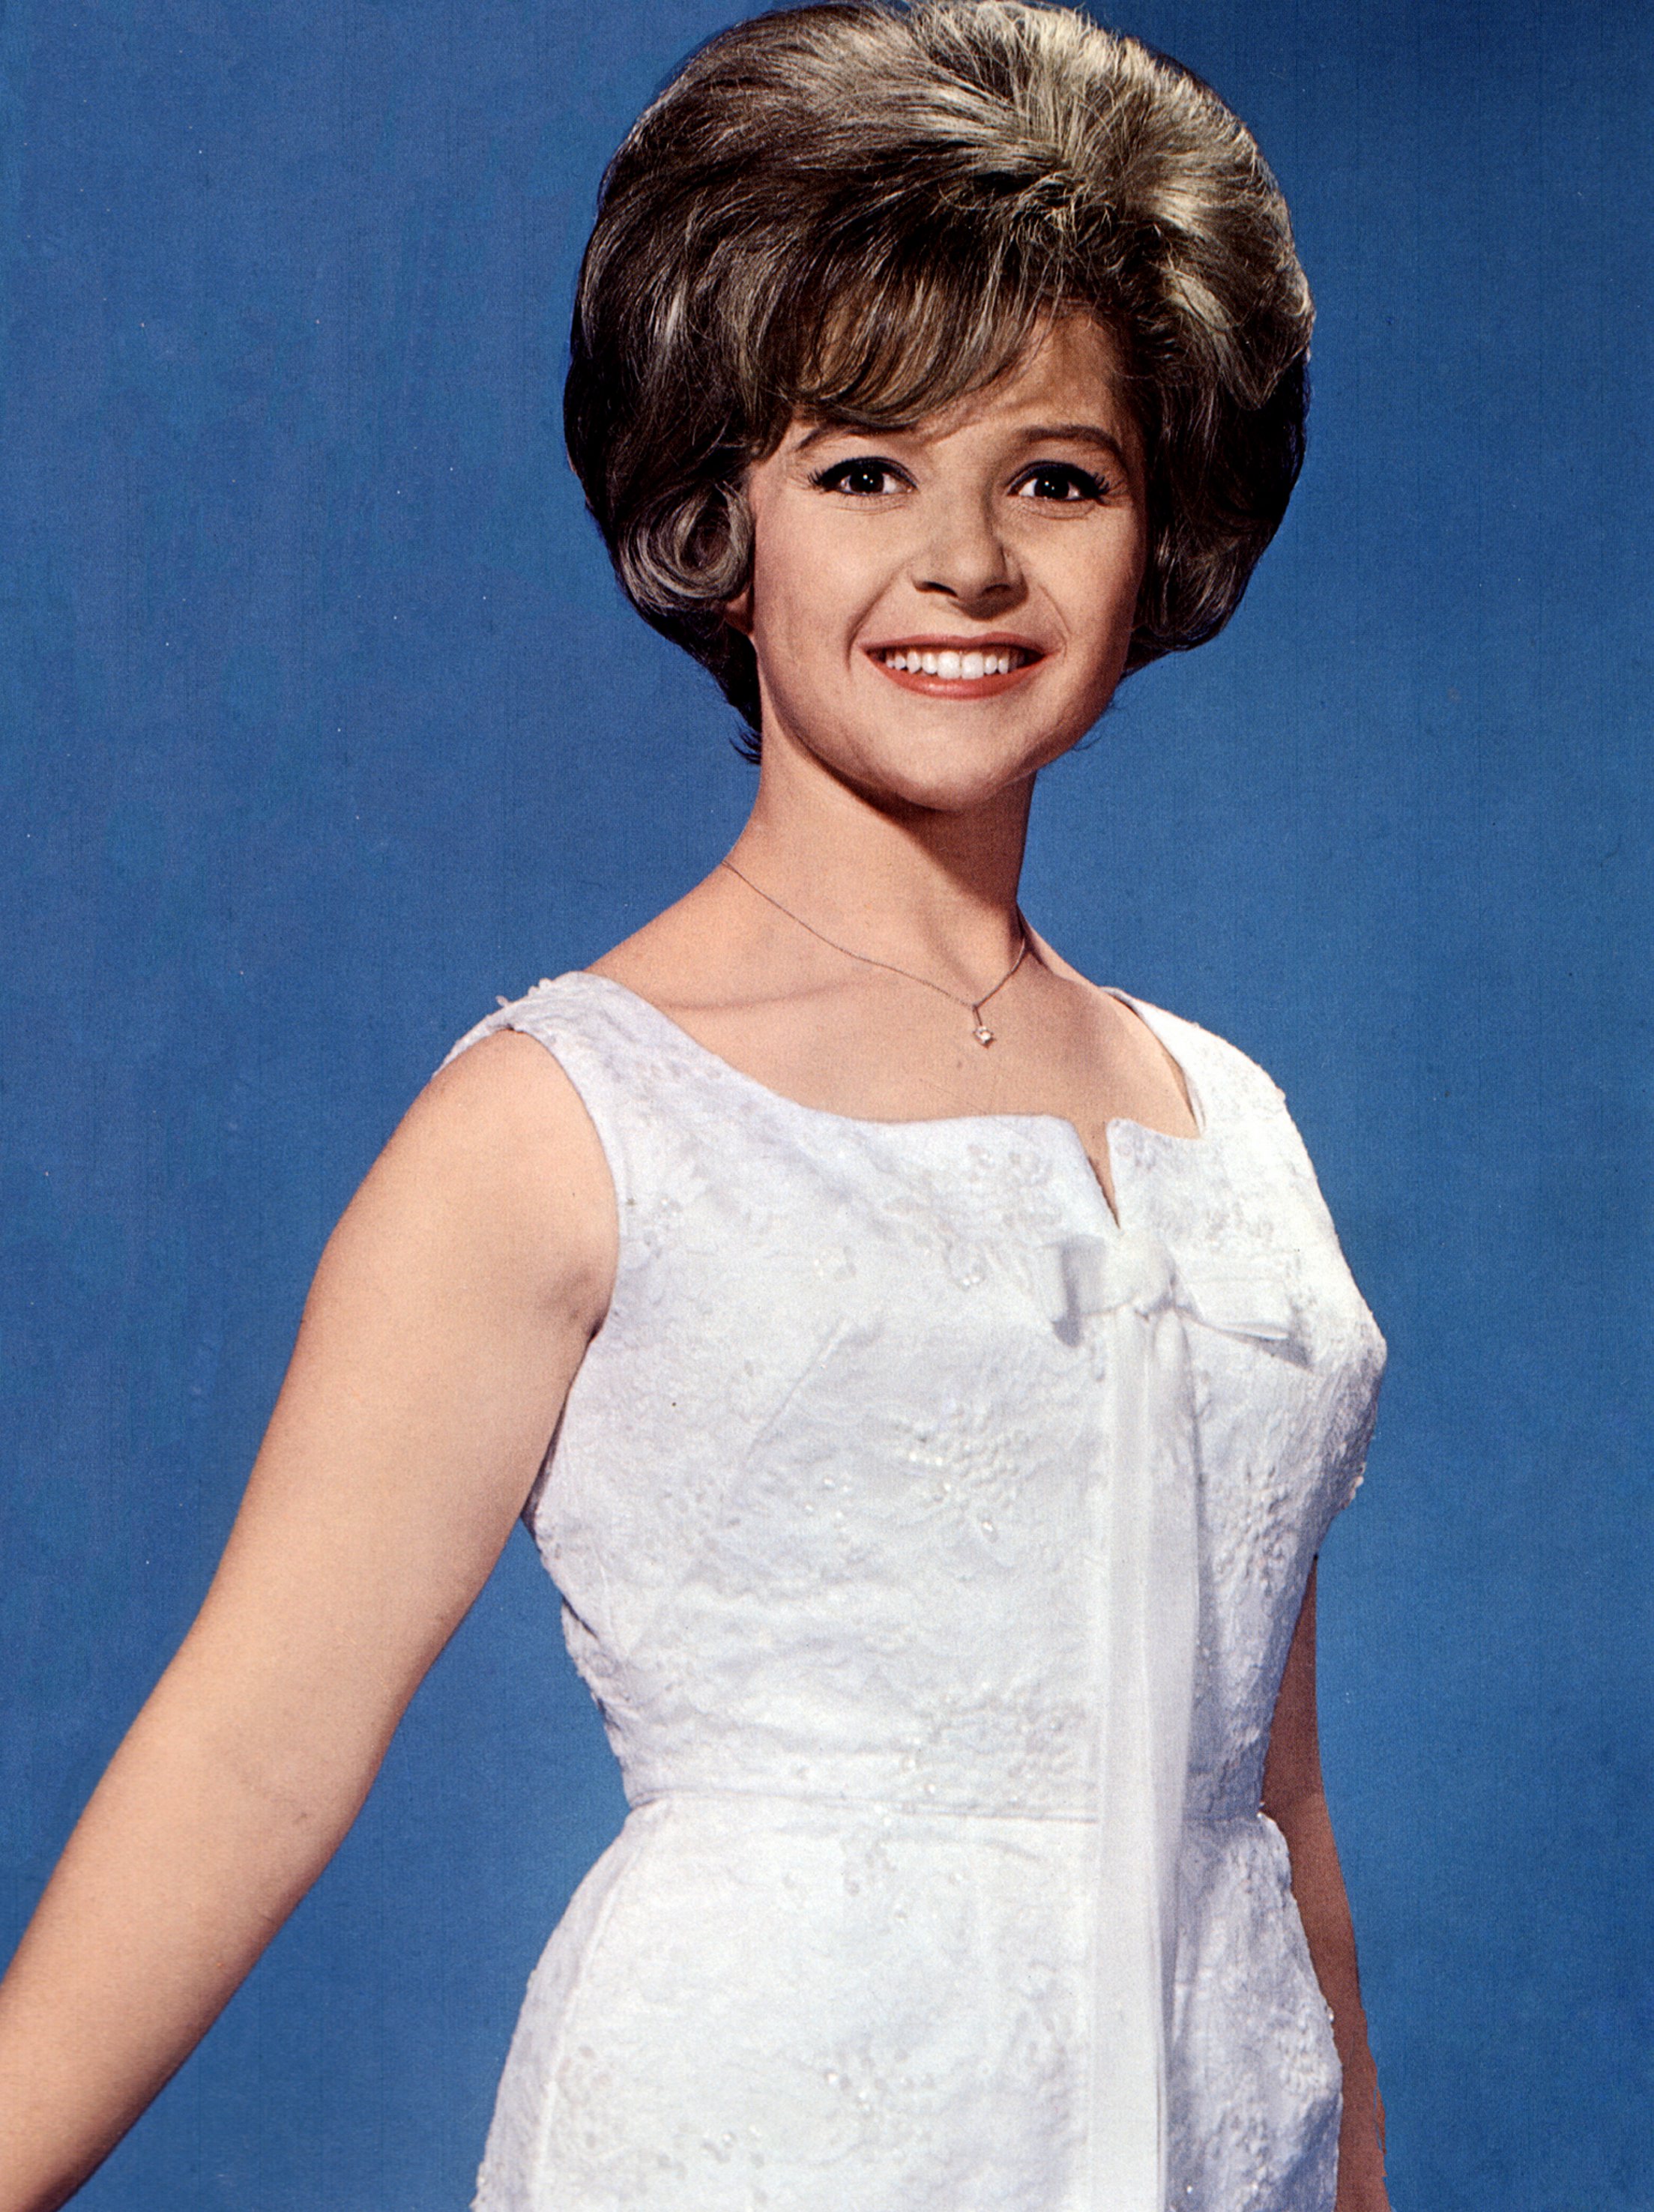 Brenda Lee photographed in 1960 | Source: Getty Images